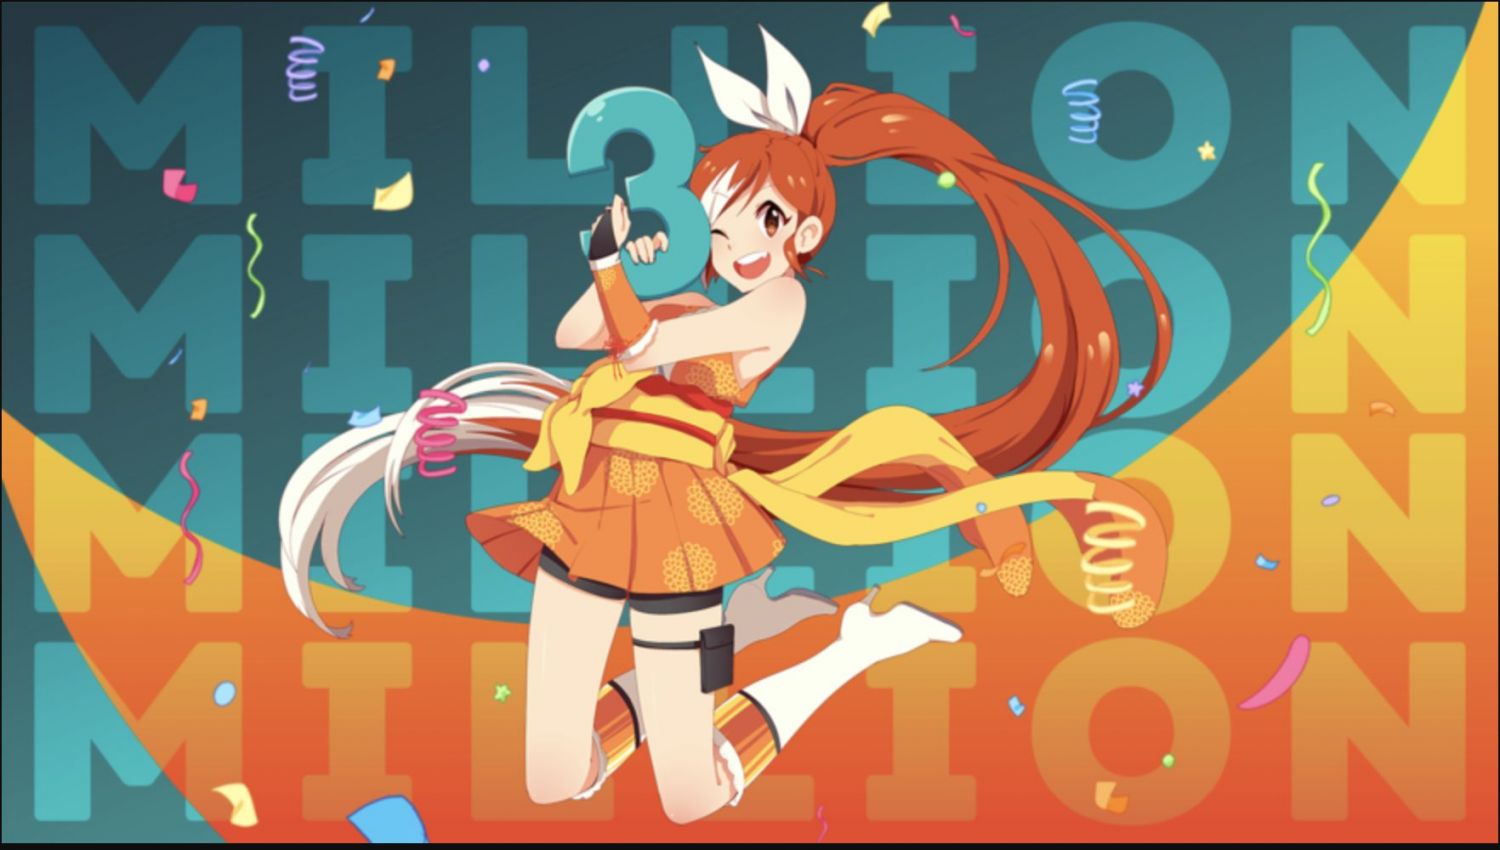 Is Crunchyroll the Right Specialty Streamer for the Moment? – The Hollywood  Reporter